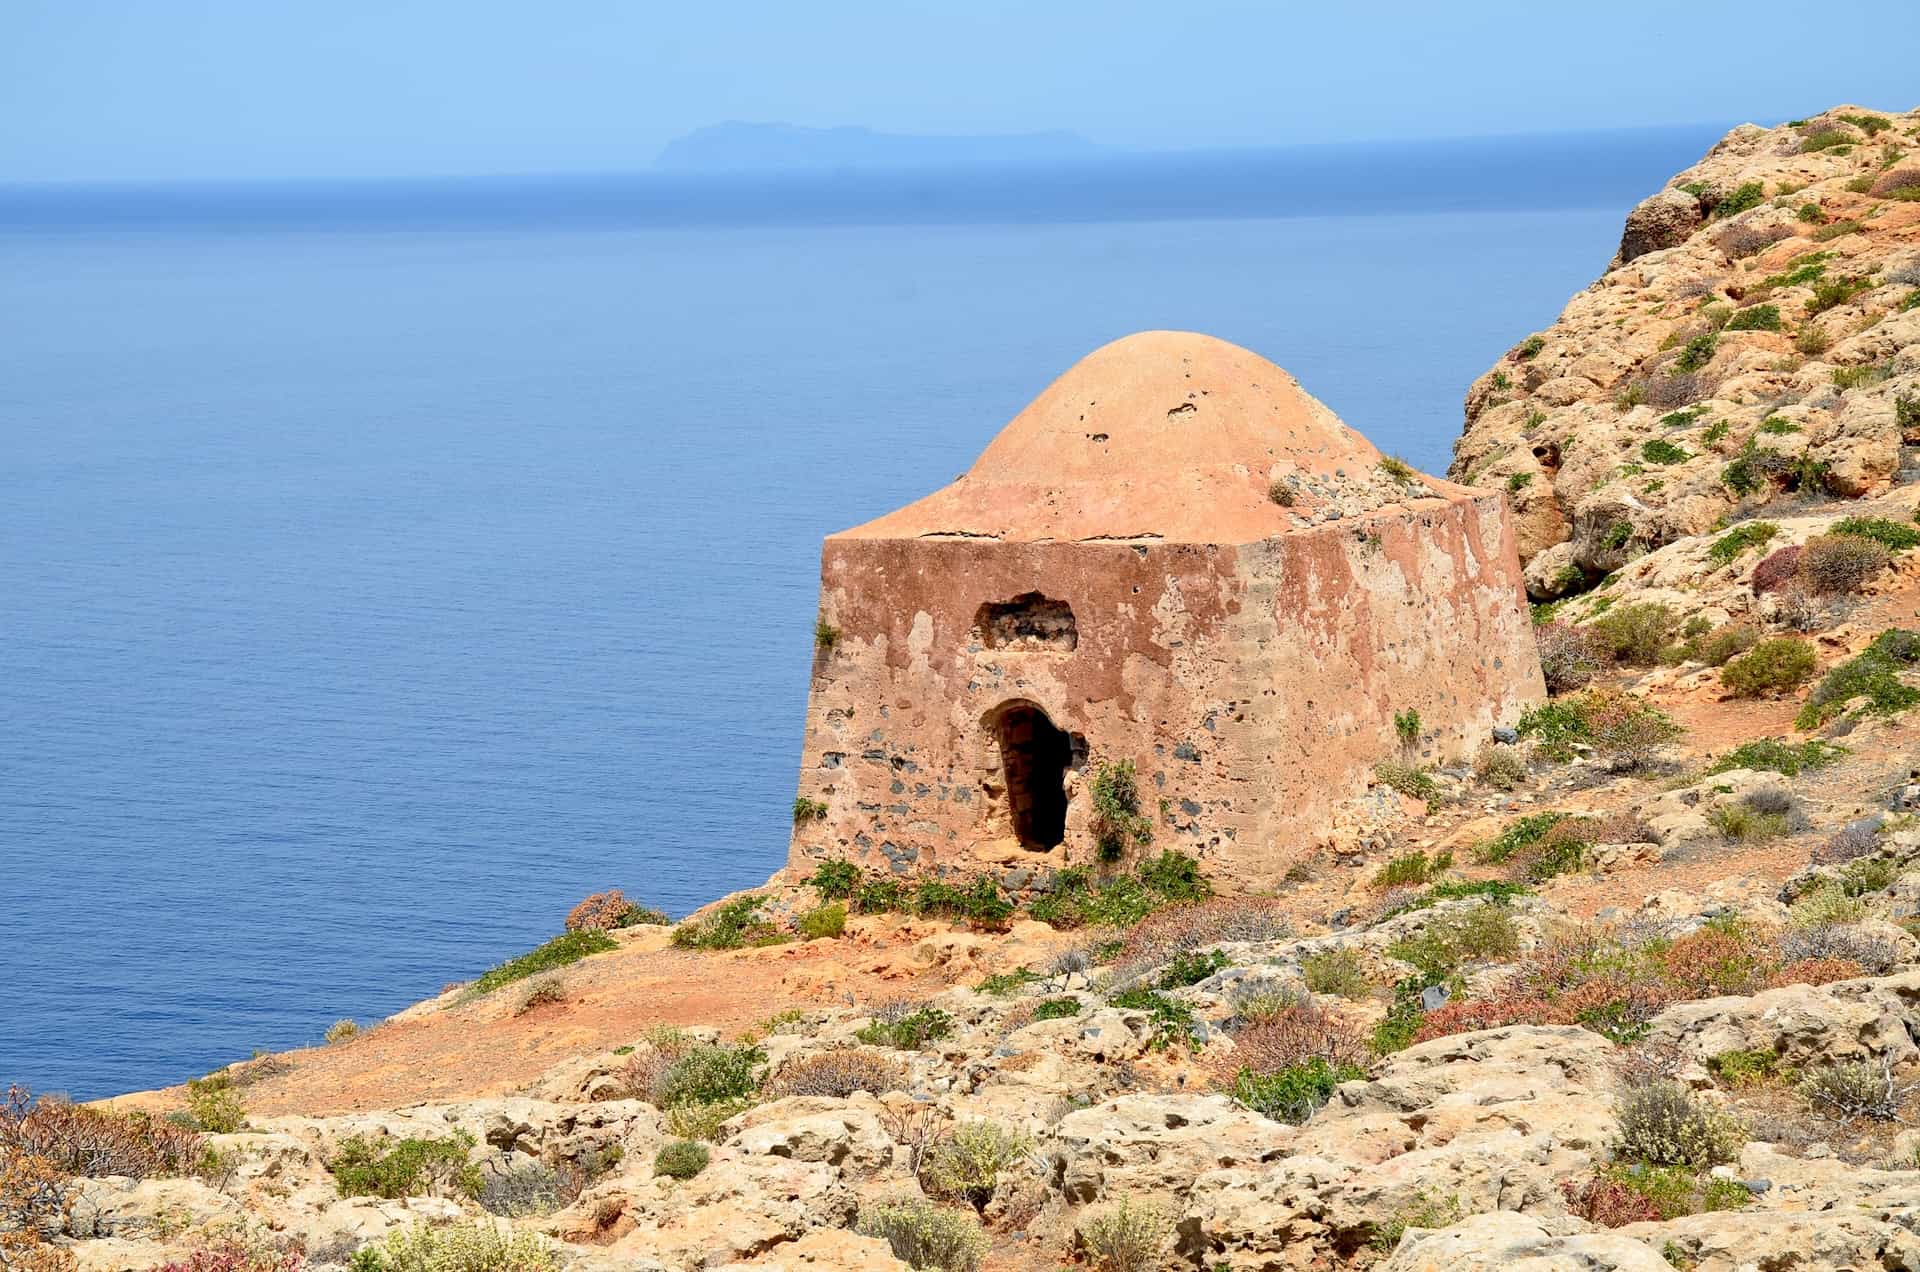 Powder storehouse / mosque at the Venetian fortress on Gramvousa, Crete